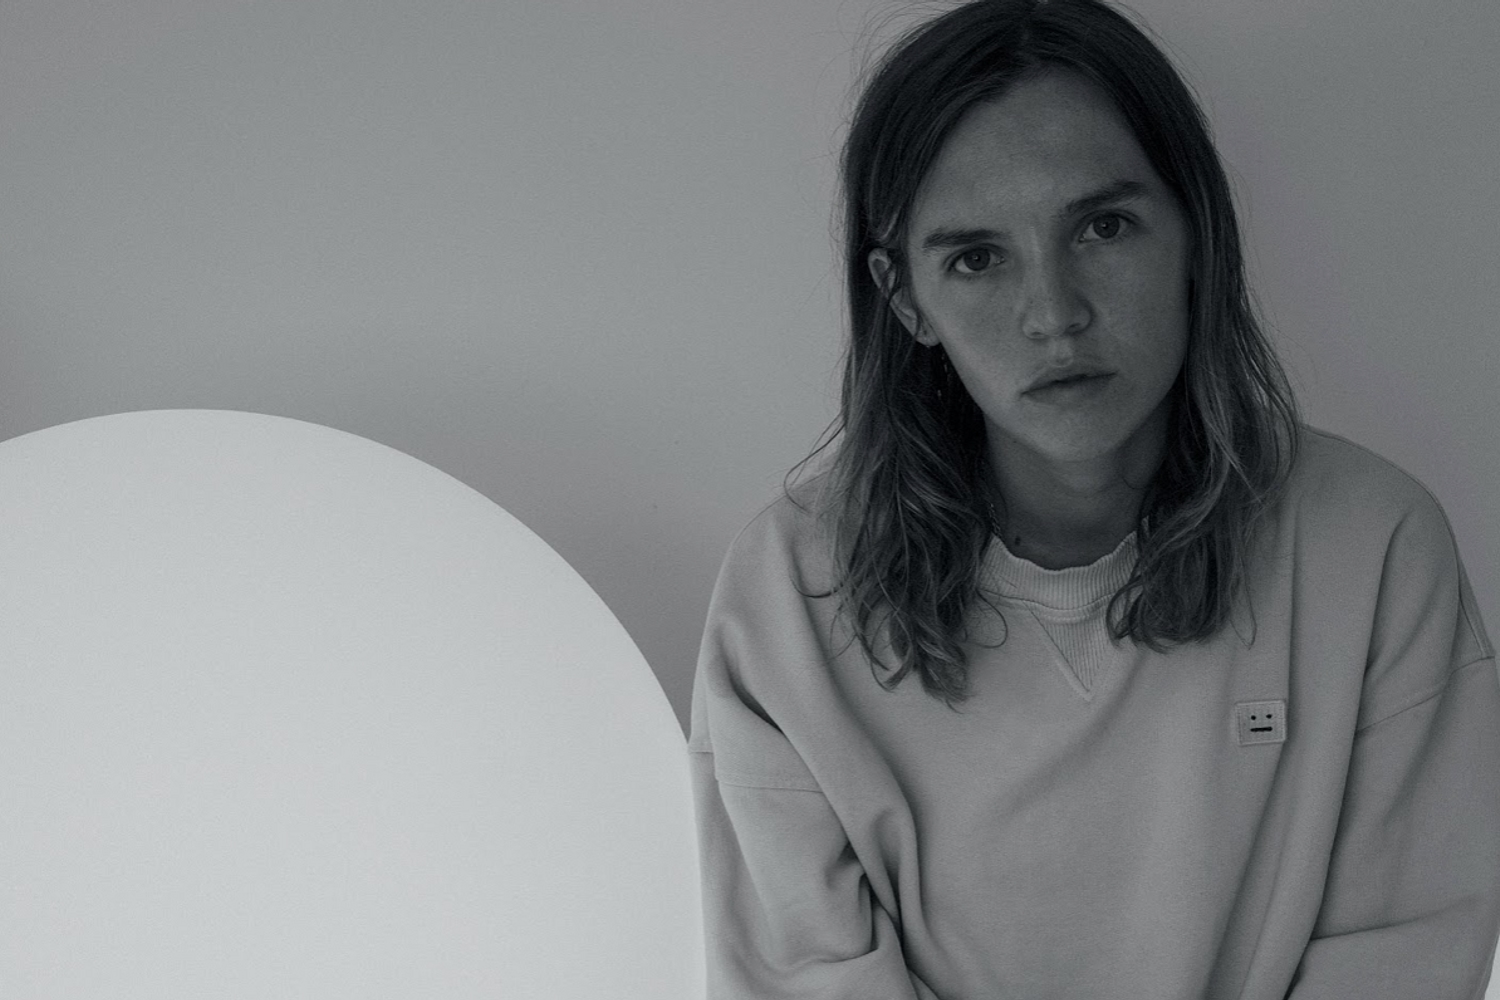 The Japanese House unveils 'Chewing Cotton Wool' EP